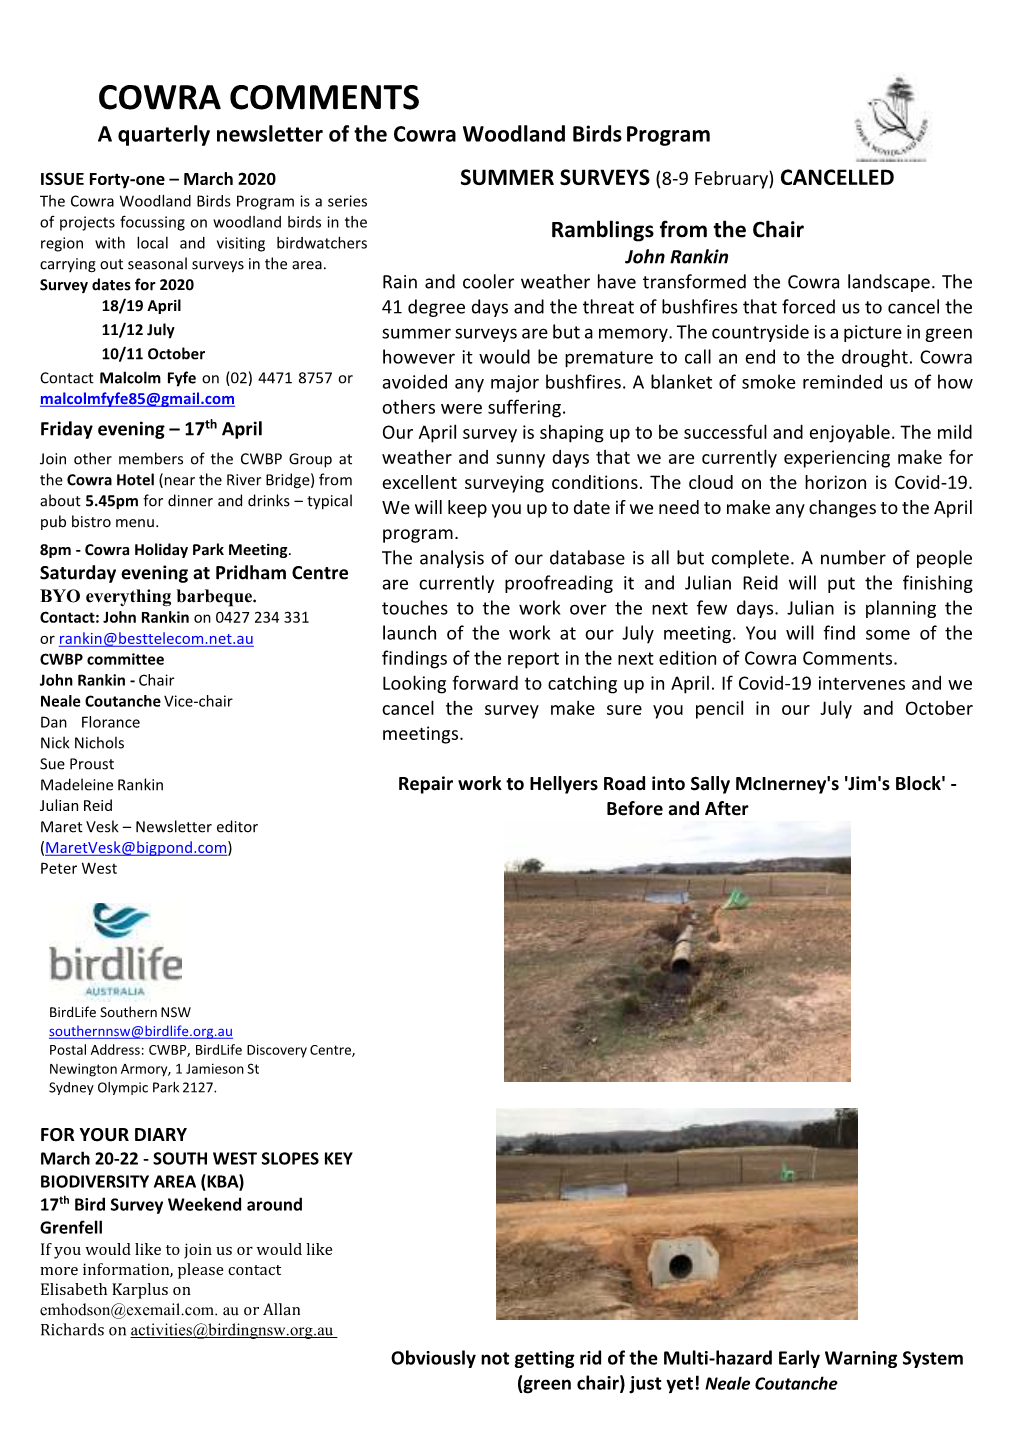 COWRA COMMENTS a Quarterly Newsletter of the Cowra Woodland Birds Program